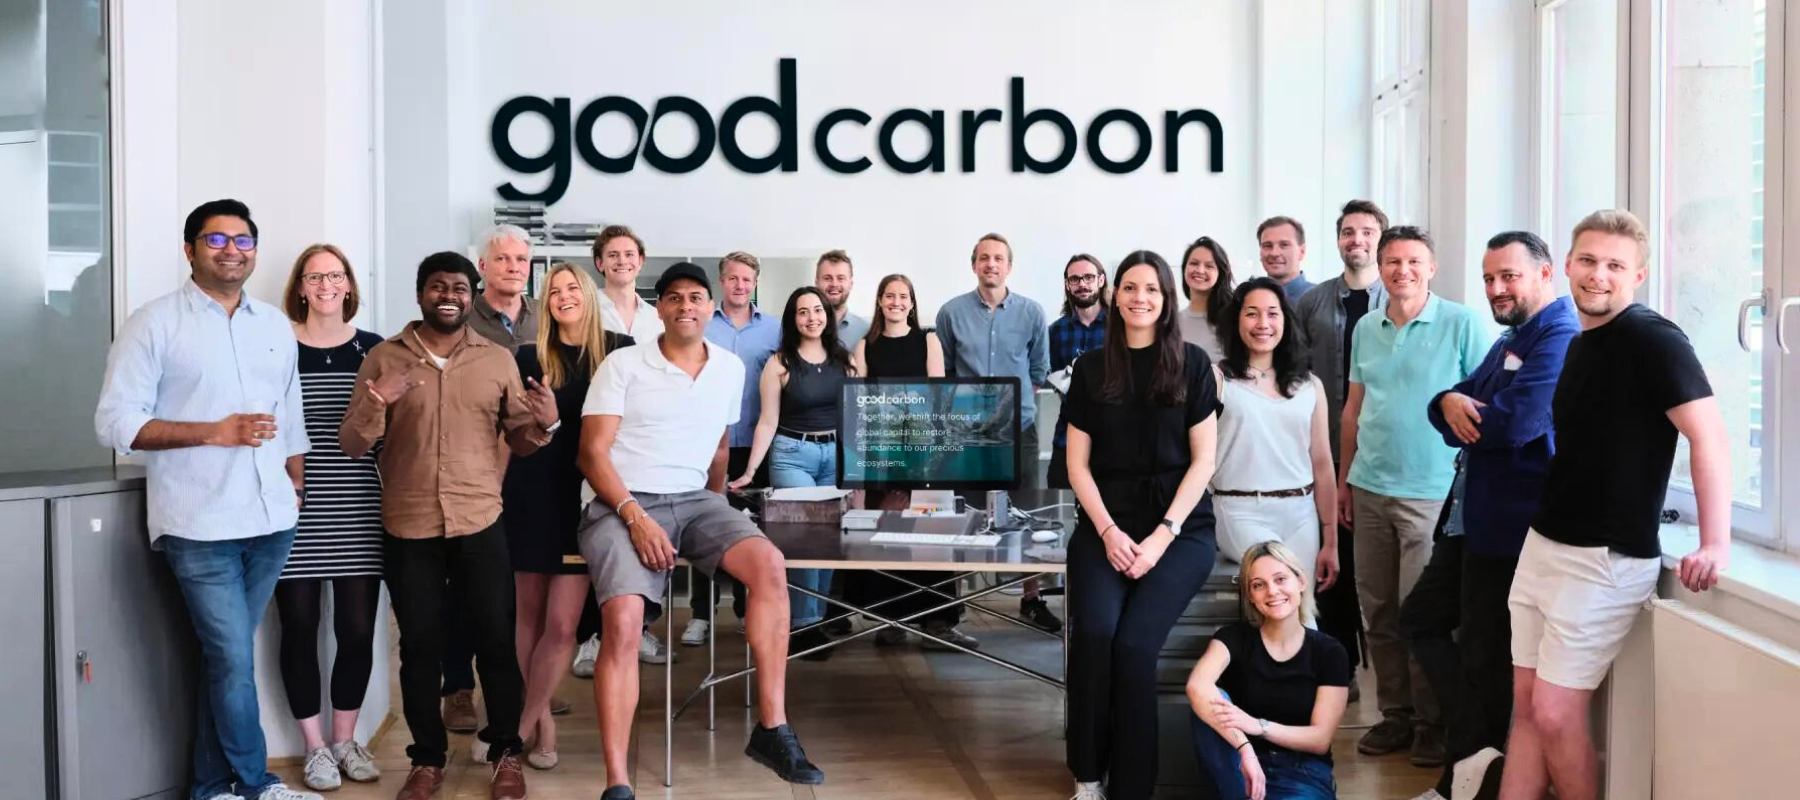 Berlin-based startup goodcarbon raises €5.25m funding for its long-term carbon credit portfolios